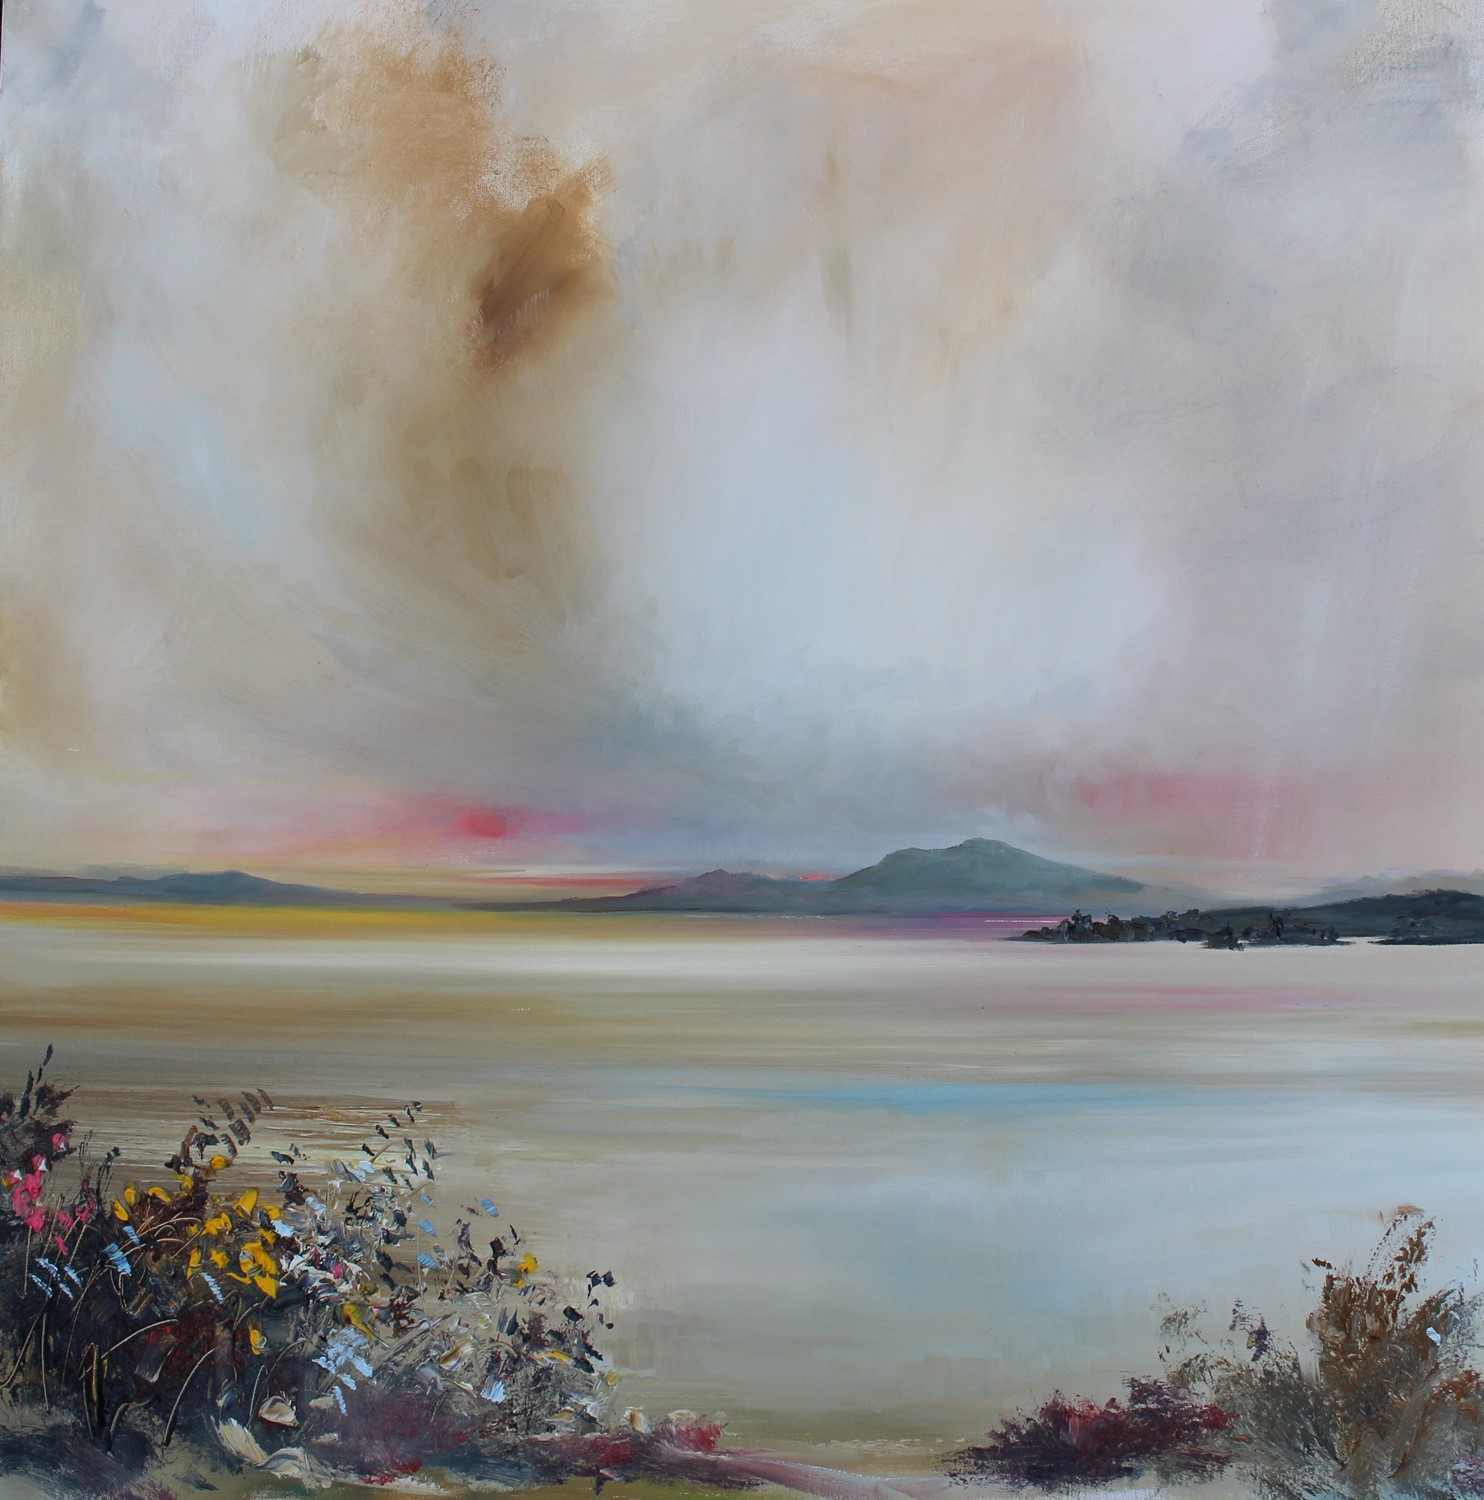 'Drama in the Sky' by artist Rosanne Barr